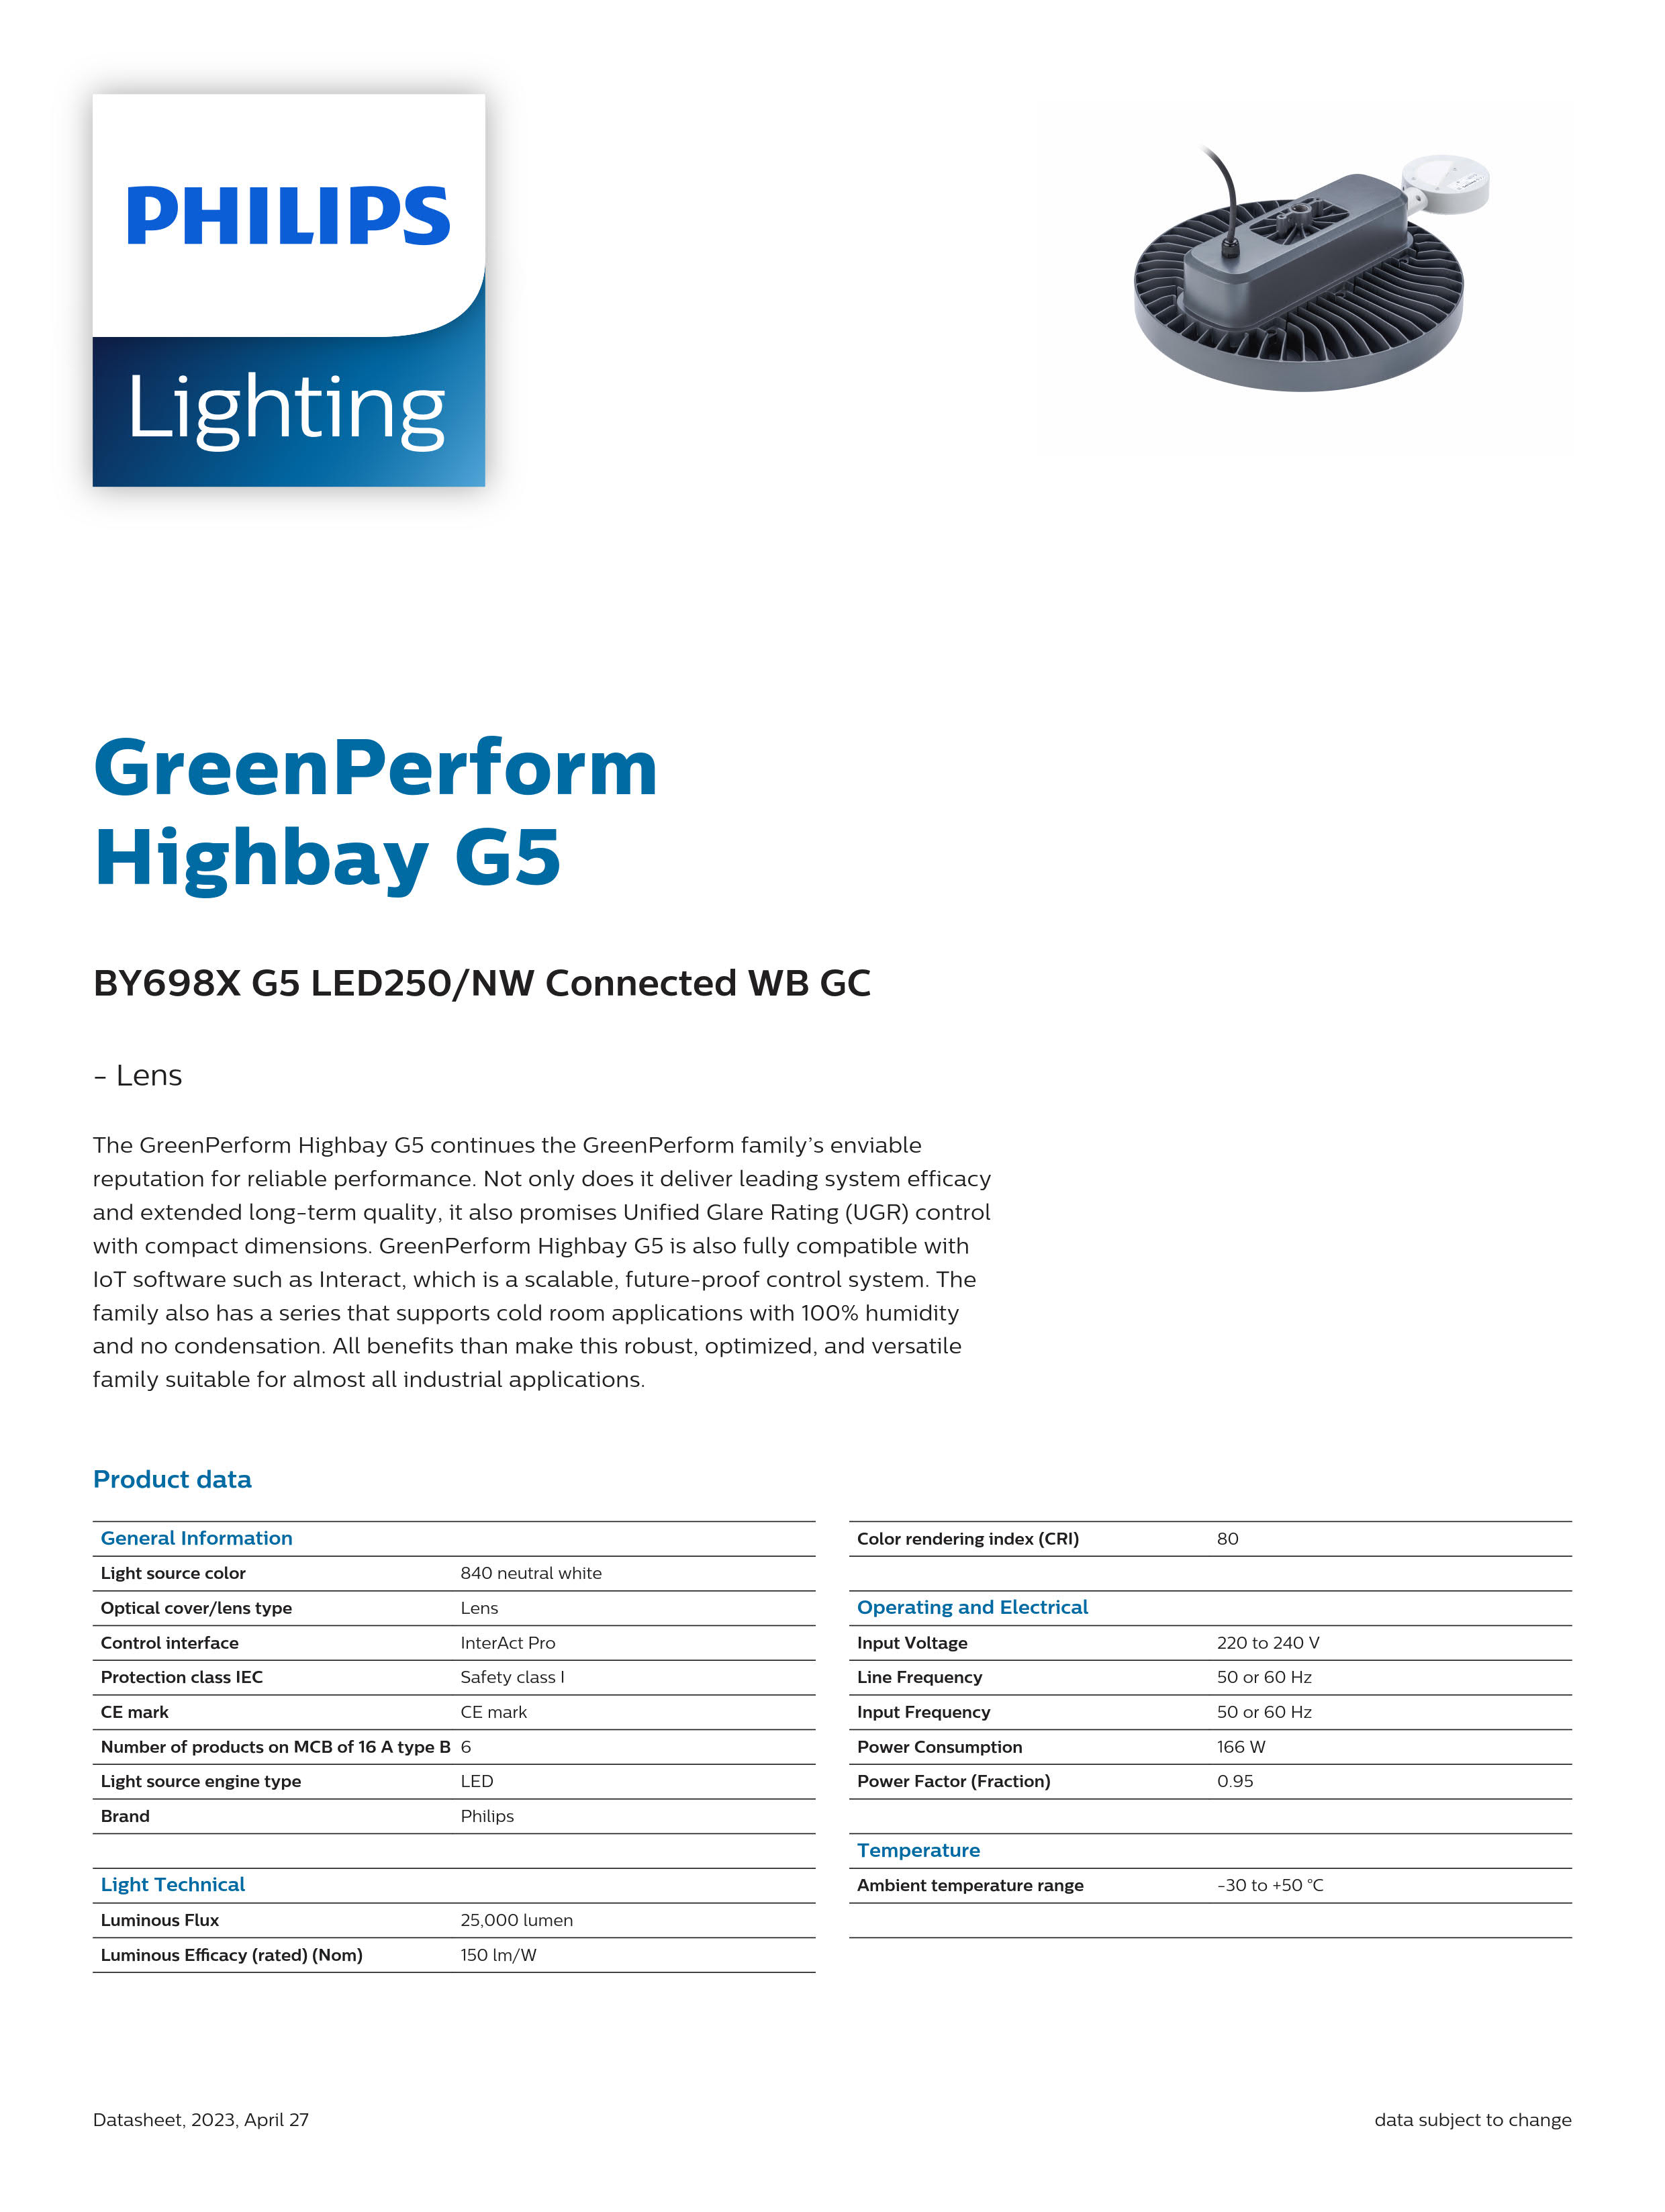 PHILIPS Highbay BY698X G5 LED250/NW Connected WB GC 911401524791